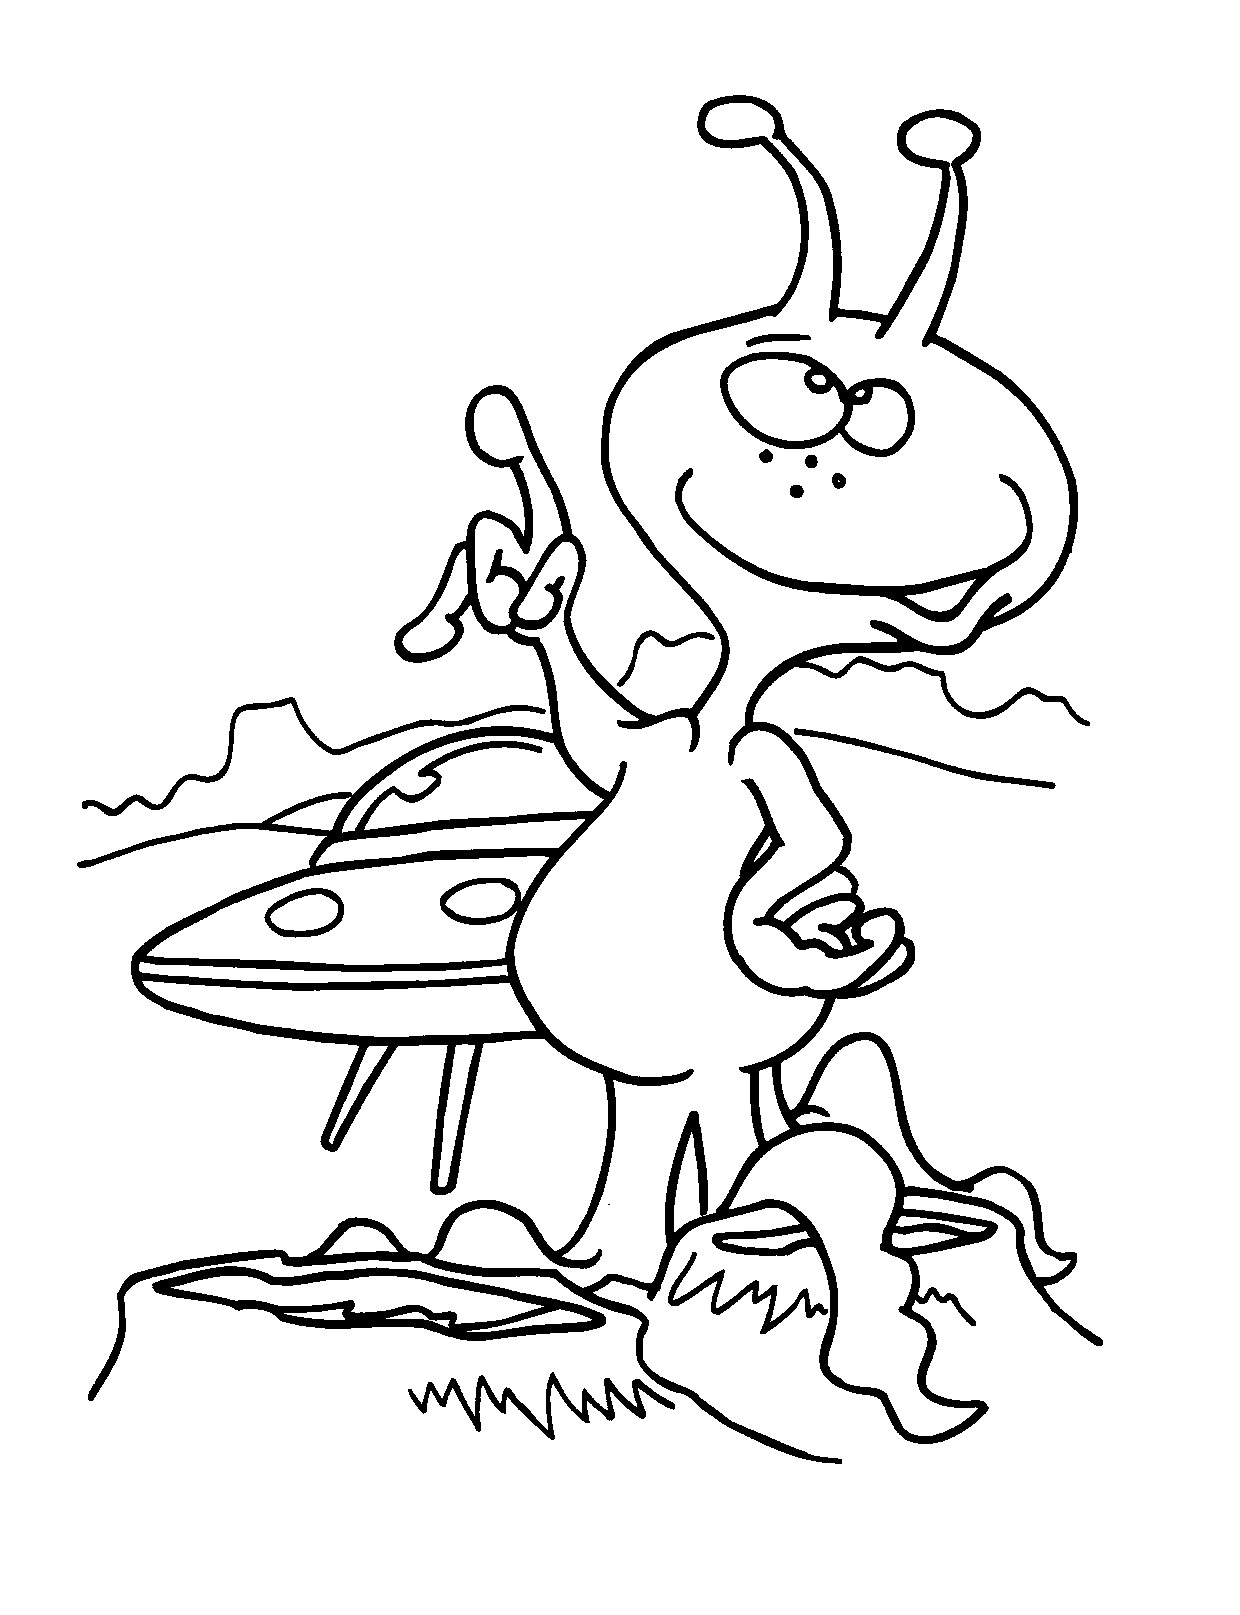 Free Printable Alien Coloring Pages For Kids